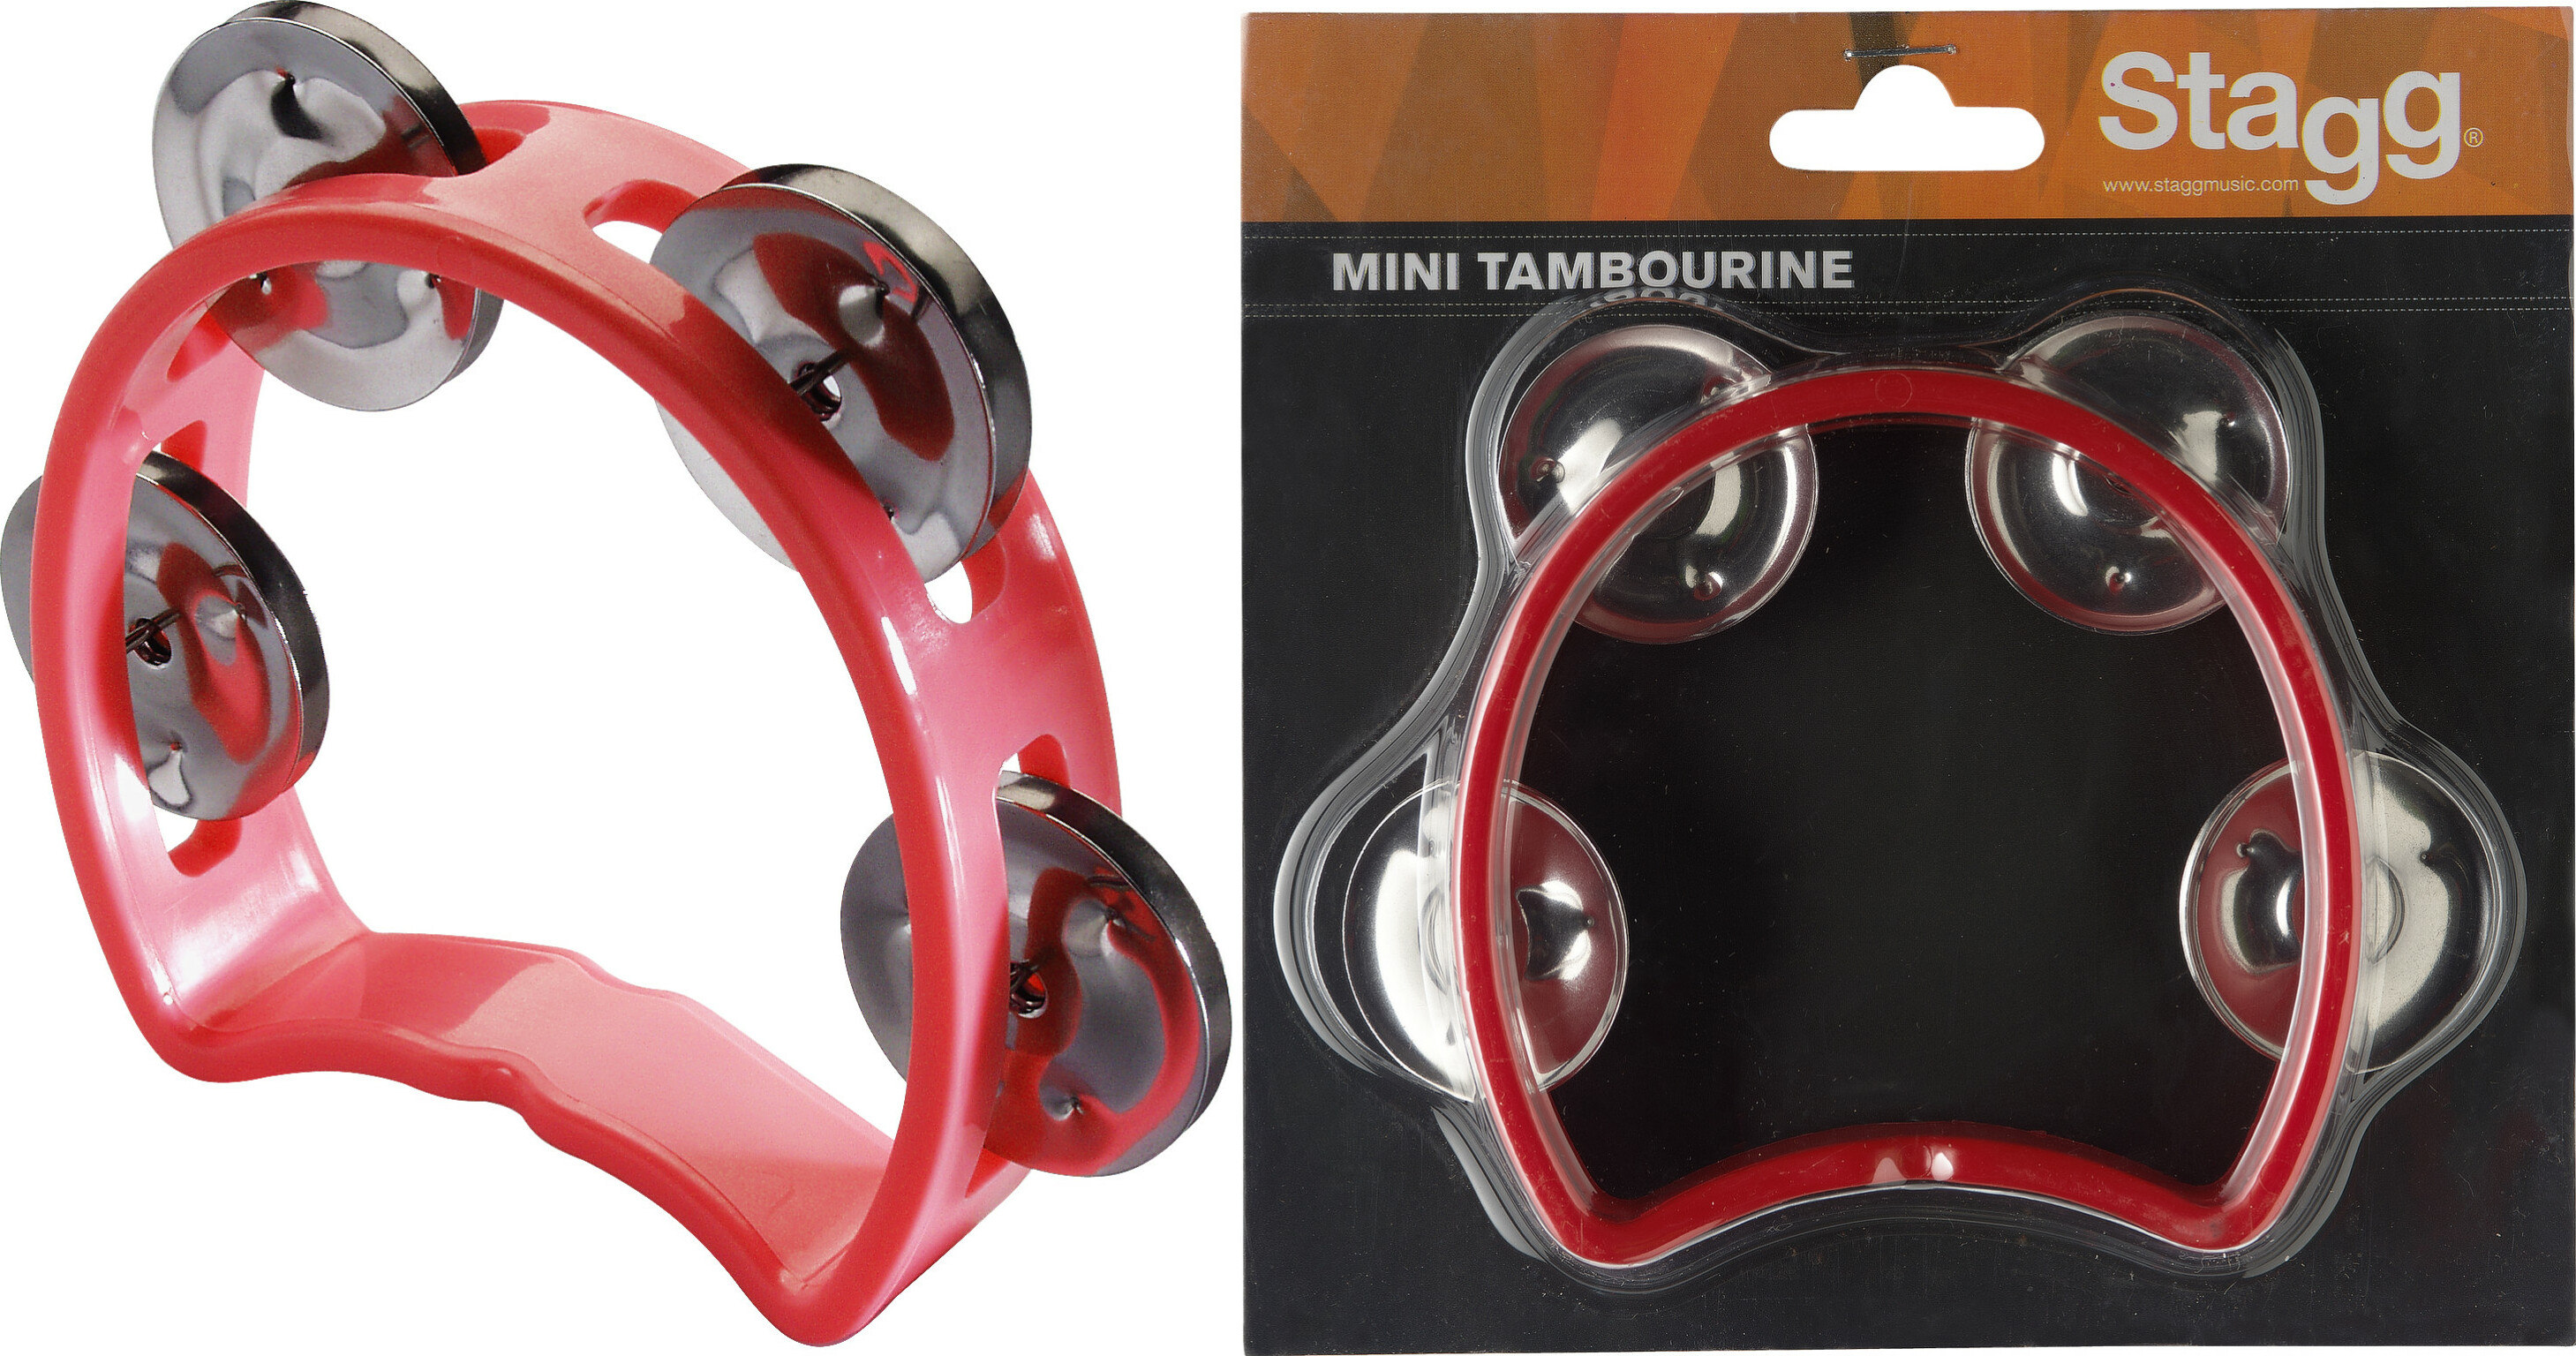 Stagg Tab-mini/rd Mini Tambourin En Plastique Avec 4 Cymbalettes Rouge - Shake percussion - Main picture